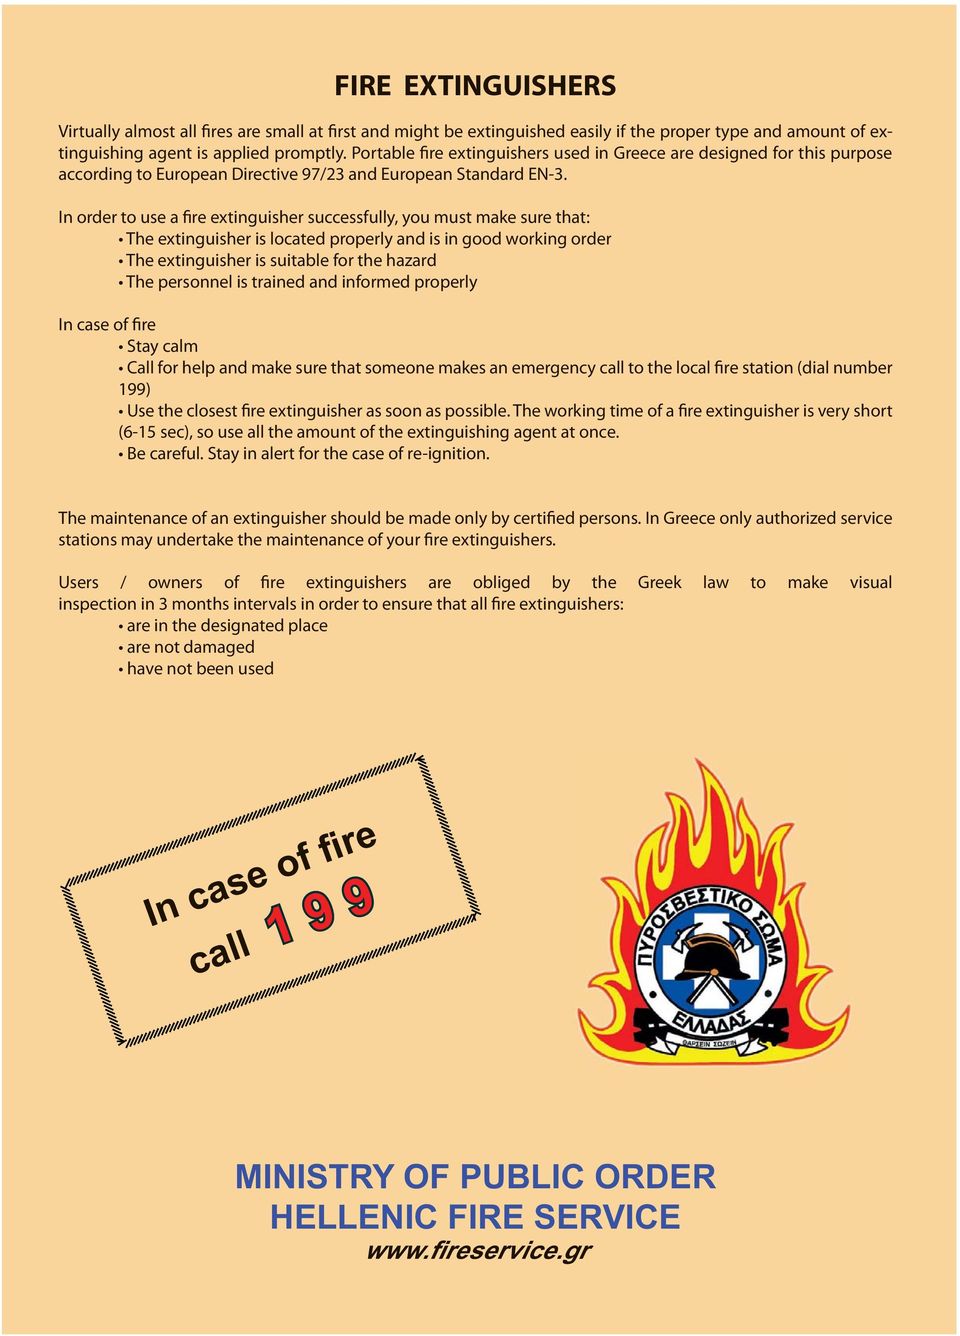 In order to use a fire extinguisher successfully, you must make sure that: The extinguisher is located properly and is in good working order The extinguisher is suitable for the hazard The personnel